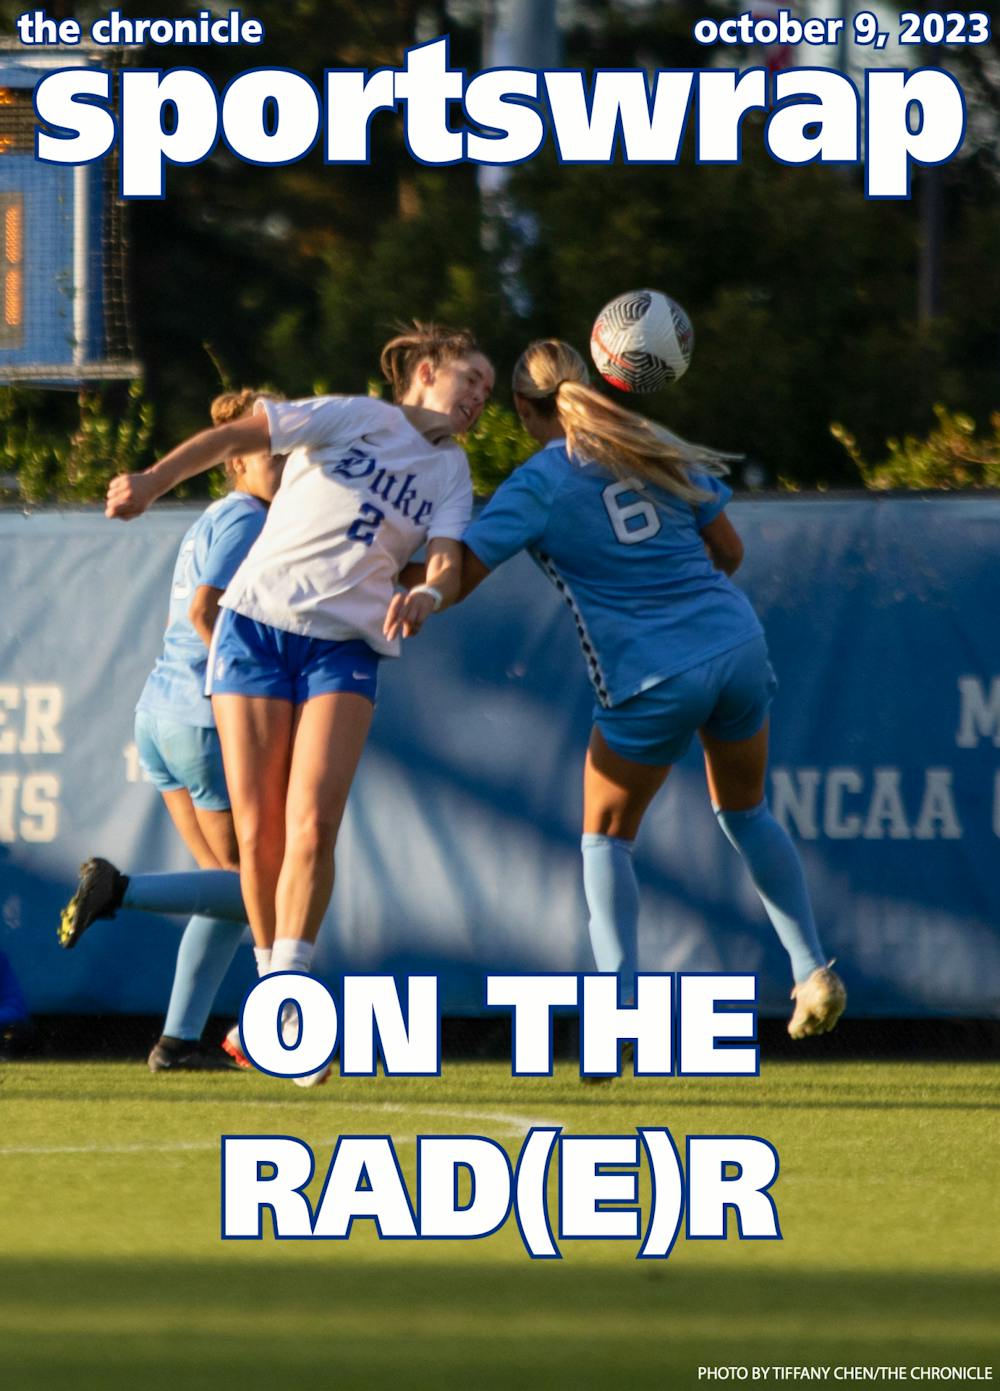 Kat Rader contests an aerial duel during Duke's match with North Carolina.